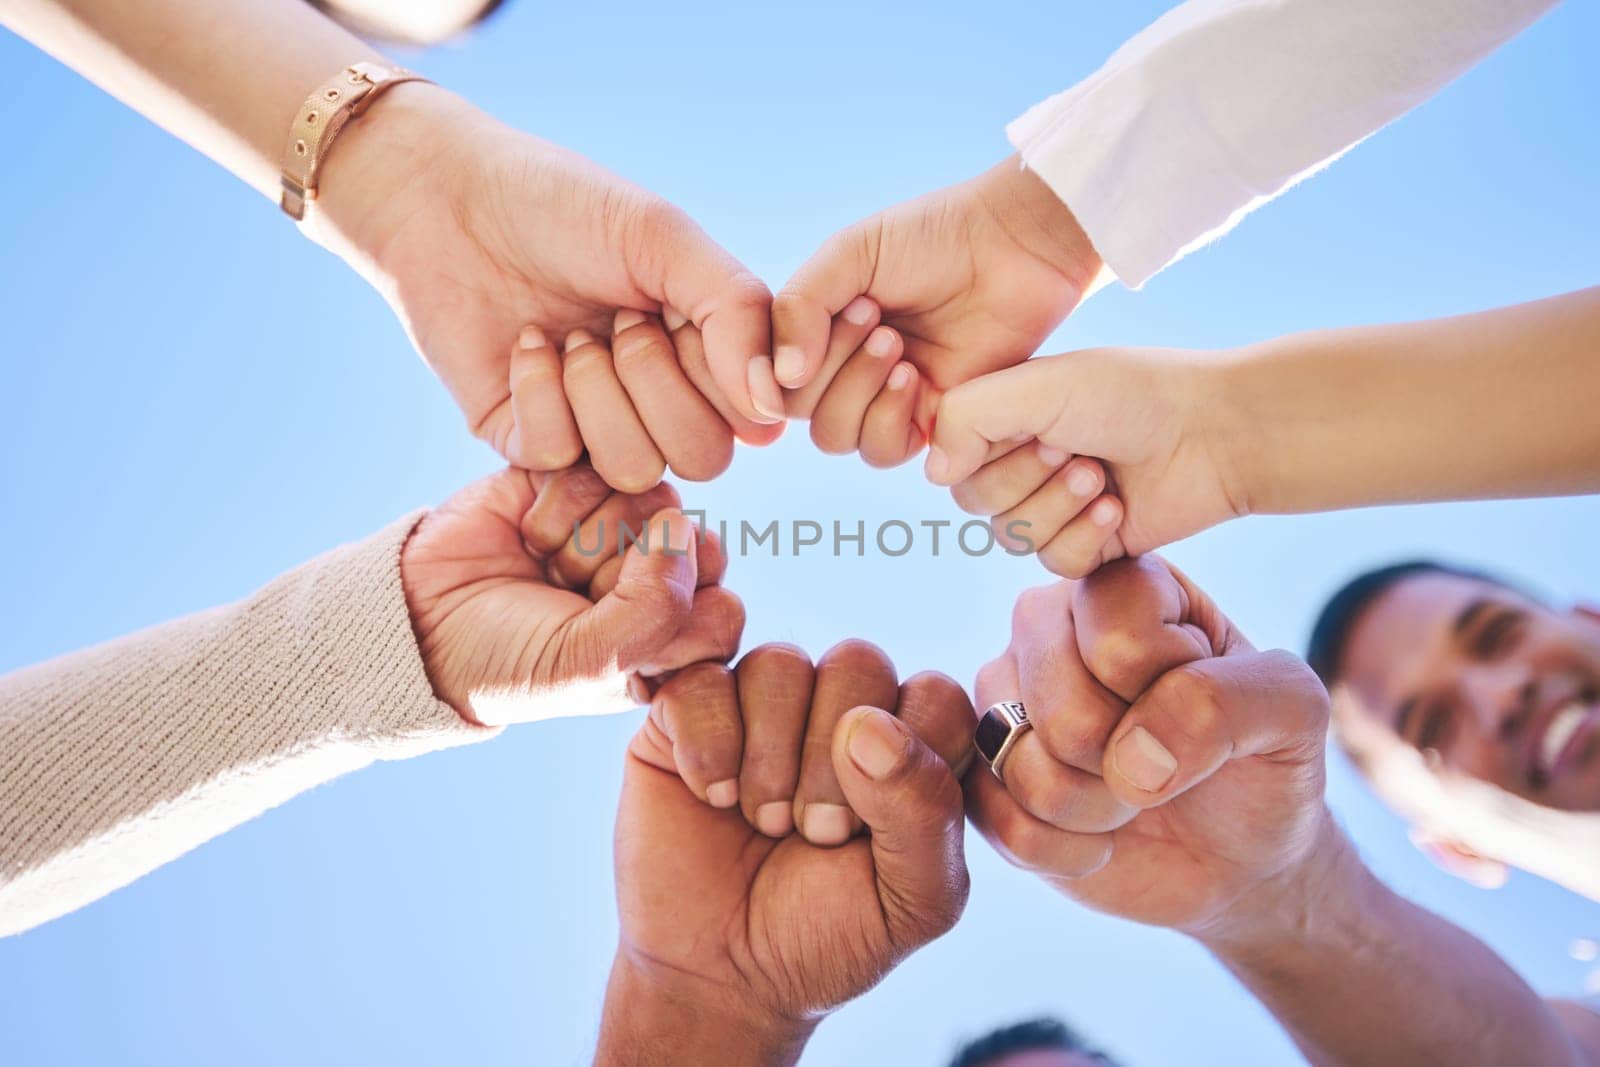 Big family, fist bump and teamwork synergy in circle for support, trust or unity in collaboration outdoors. Low angle of people or friends touching hands for team building, community or goals outside by YuriArcurs